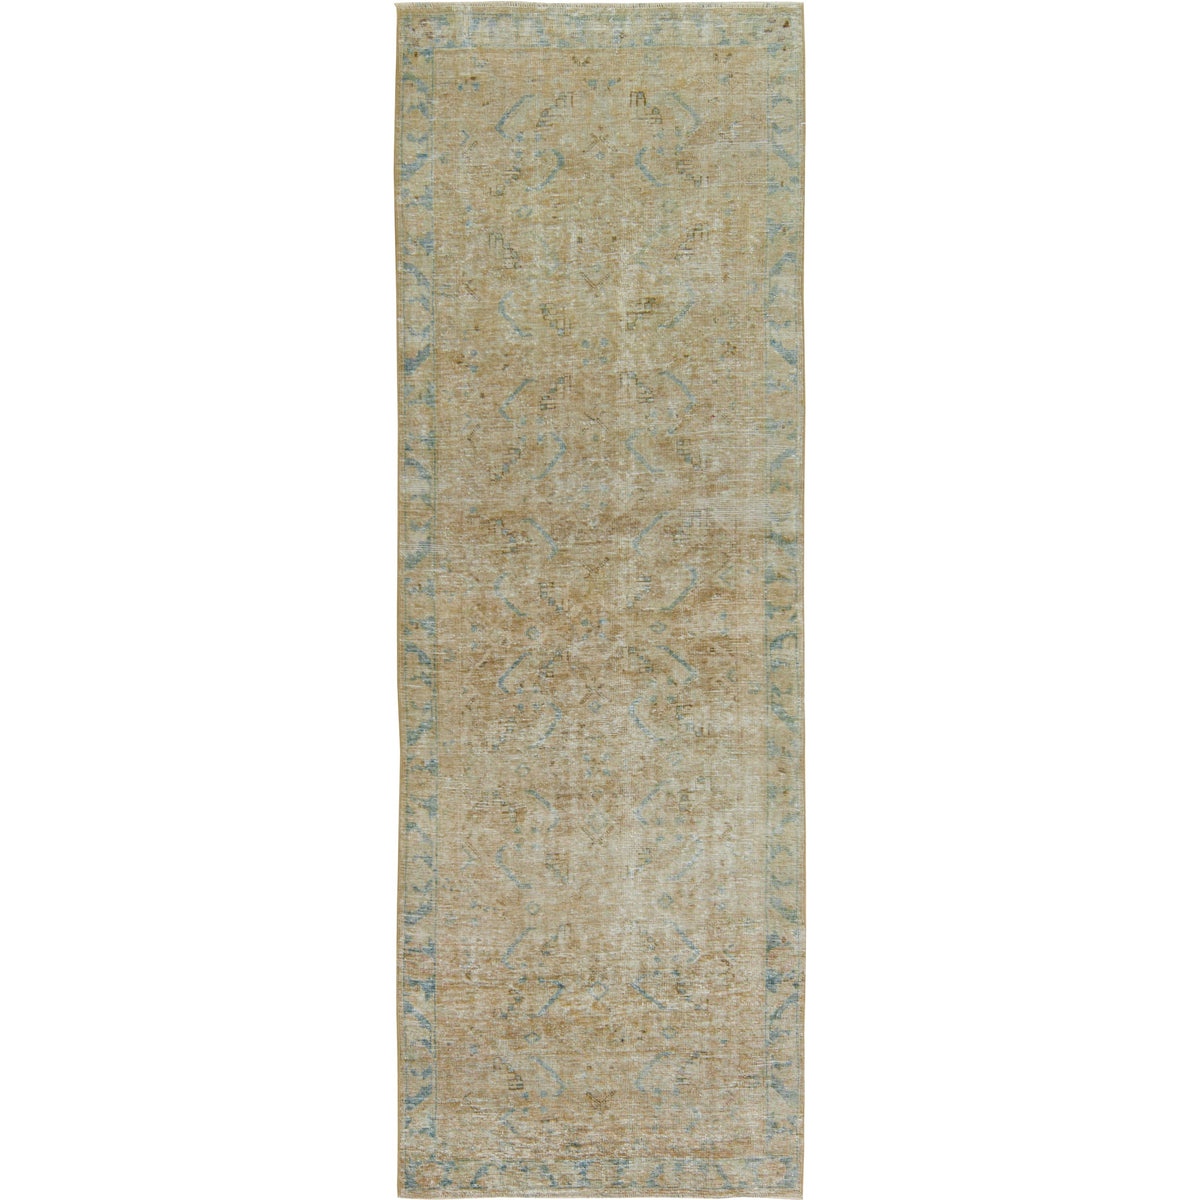 Shahar - The Beige Tapestry of Persian Legacy | Kuden Rugs